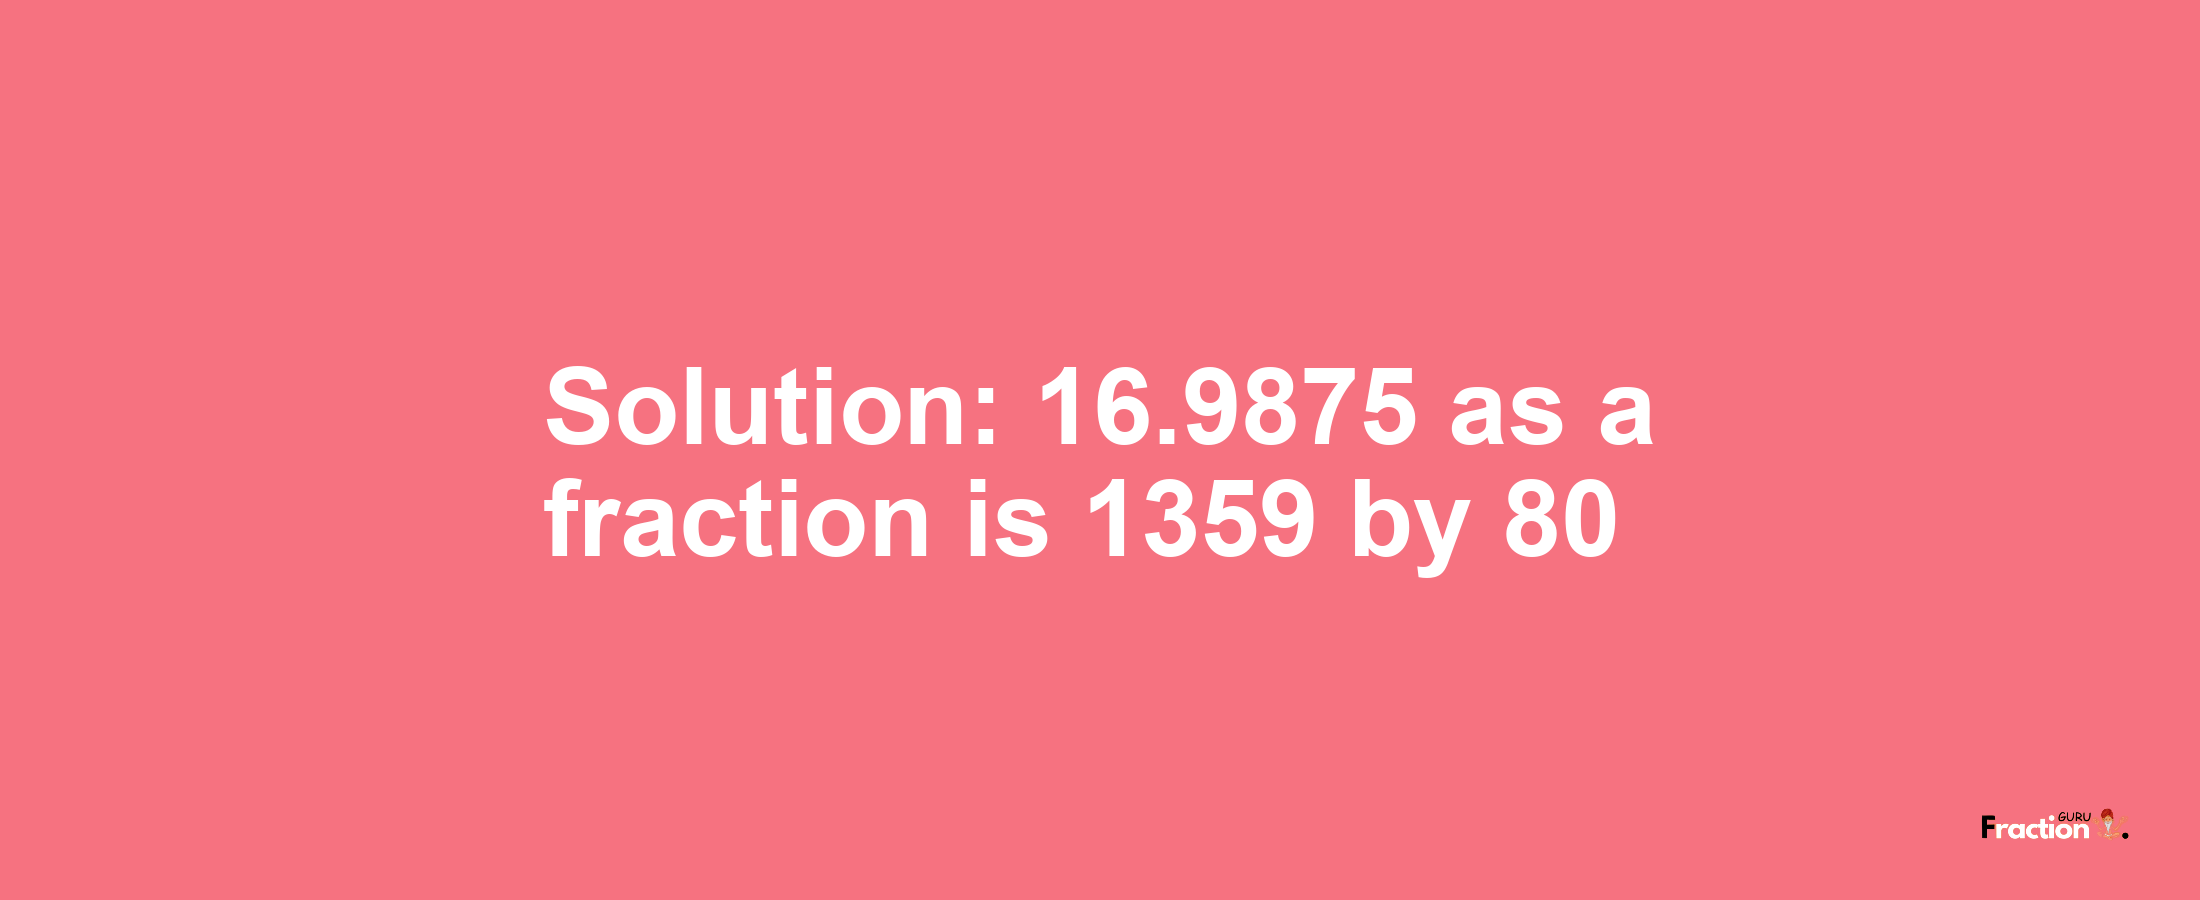 Solution:16.9875 as a fraction is 1359/80